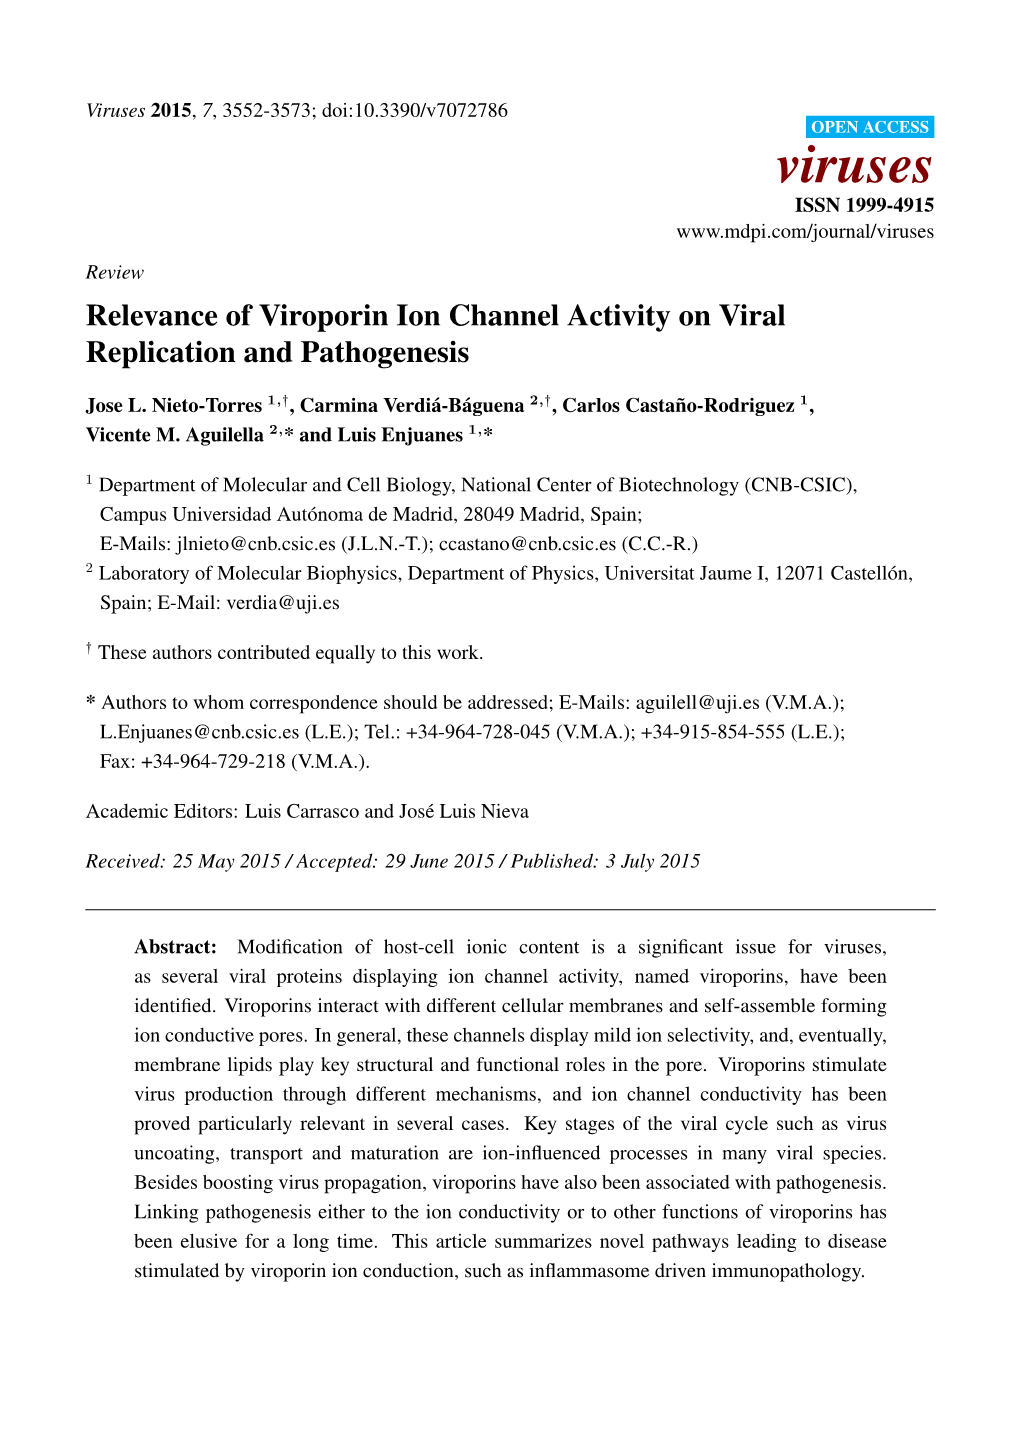 Relevance of Viroporin Ion Channel Activity on Viral Replication and Pathogenesis